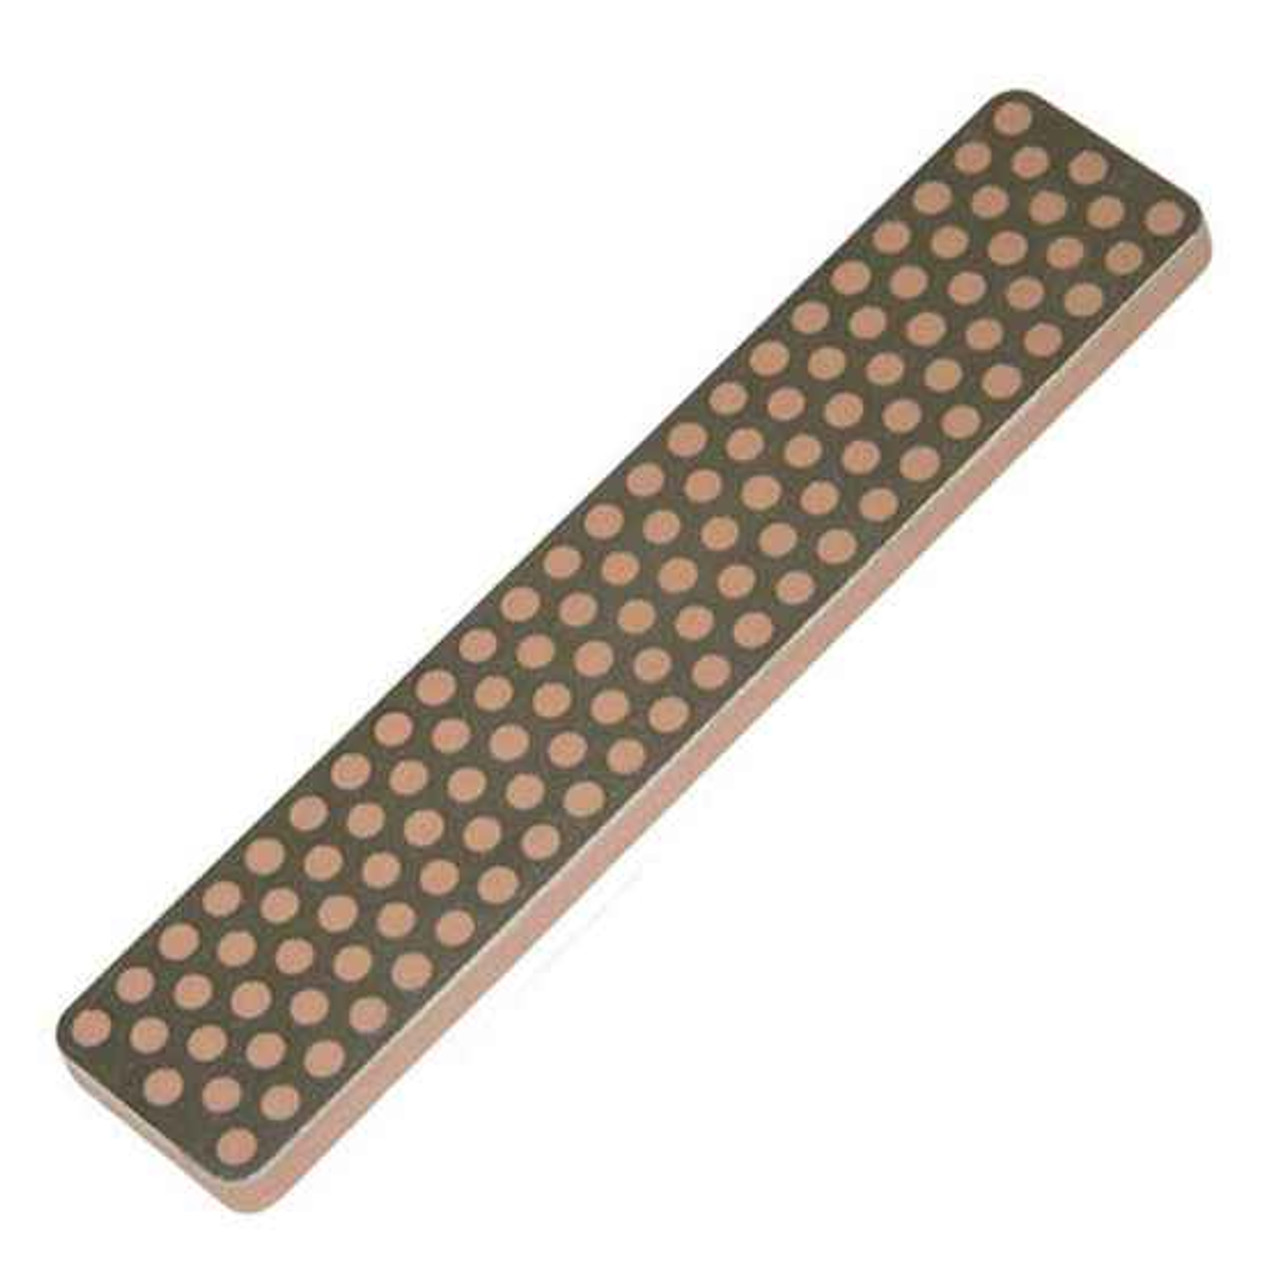 DMT 4" Replacement Diamond Whetstone for use w/Aligner, Extra Extra Fine